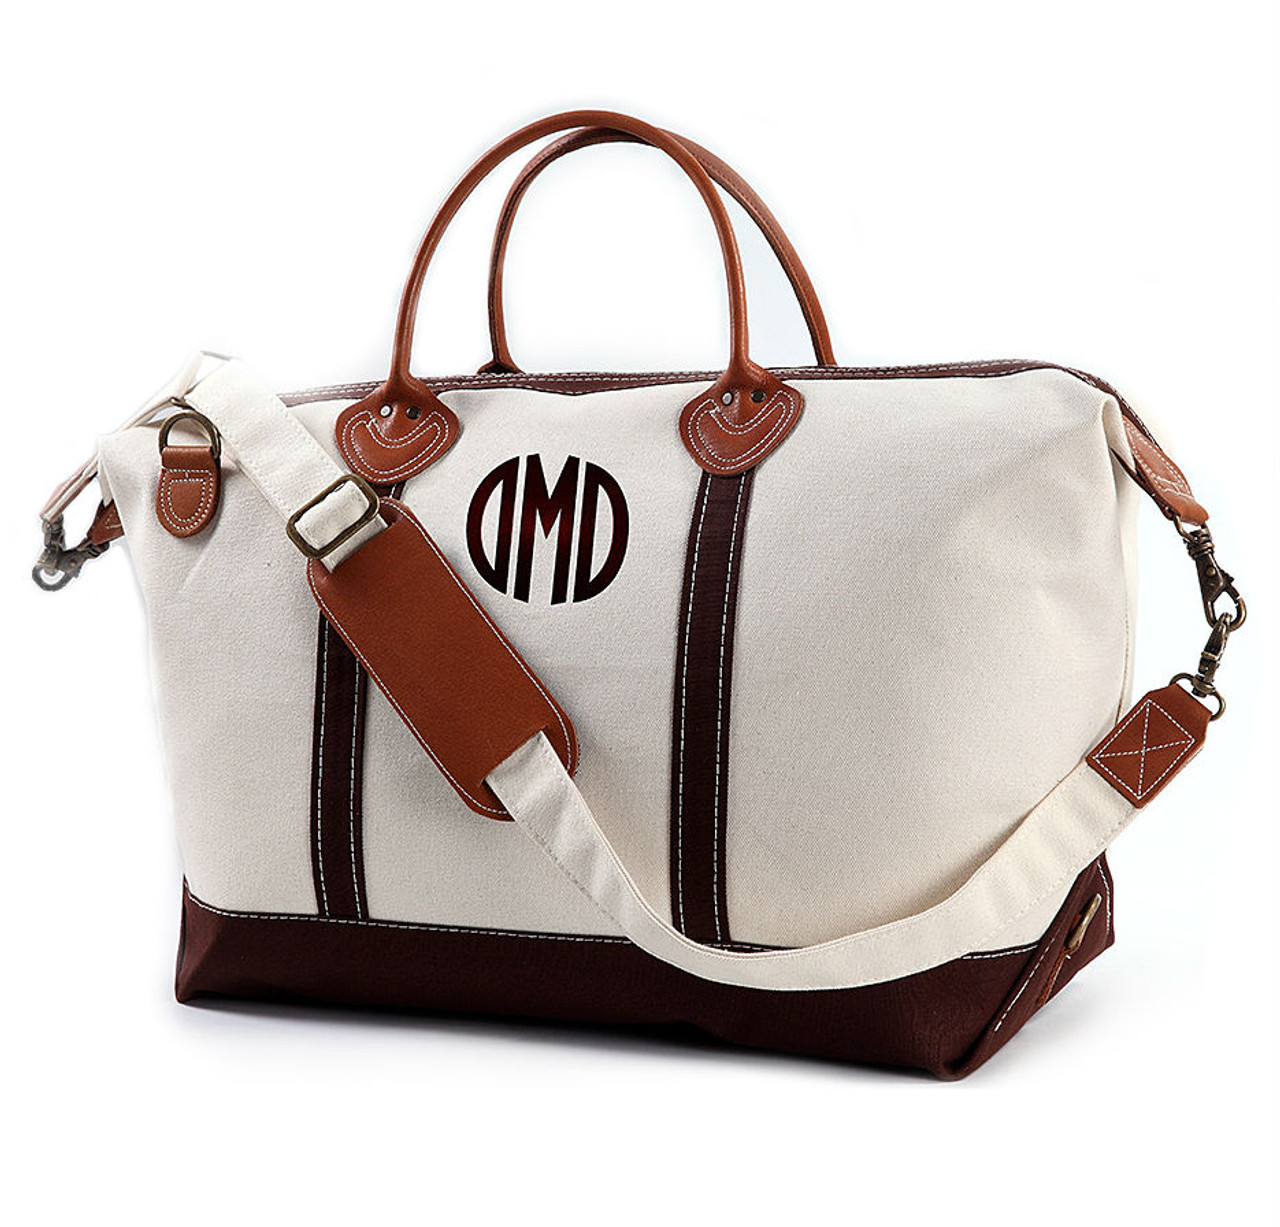 Personalized Tote with Leather Trim by Caitlin Wilson